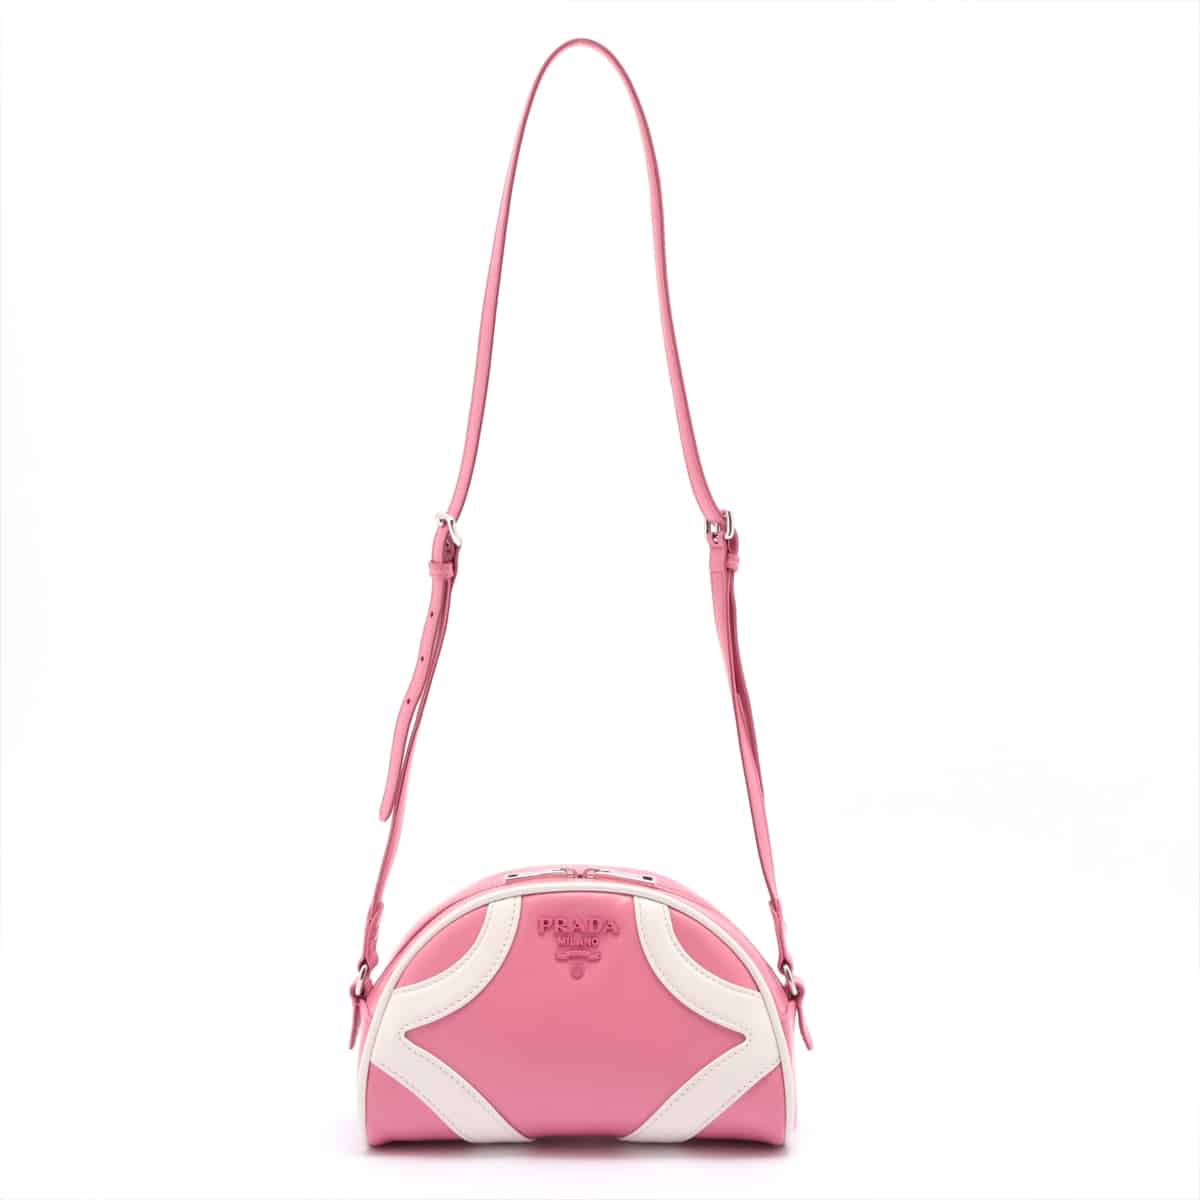 Prada Leather Shoulder bag Pink 1BH140 open papers